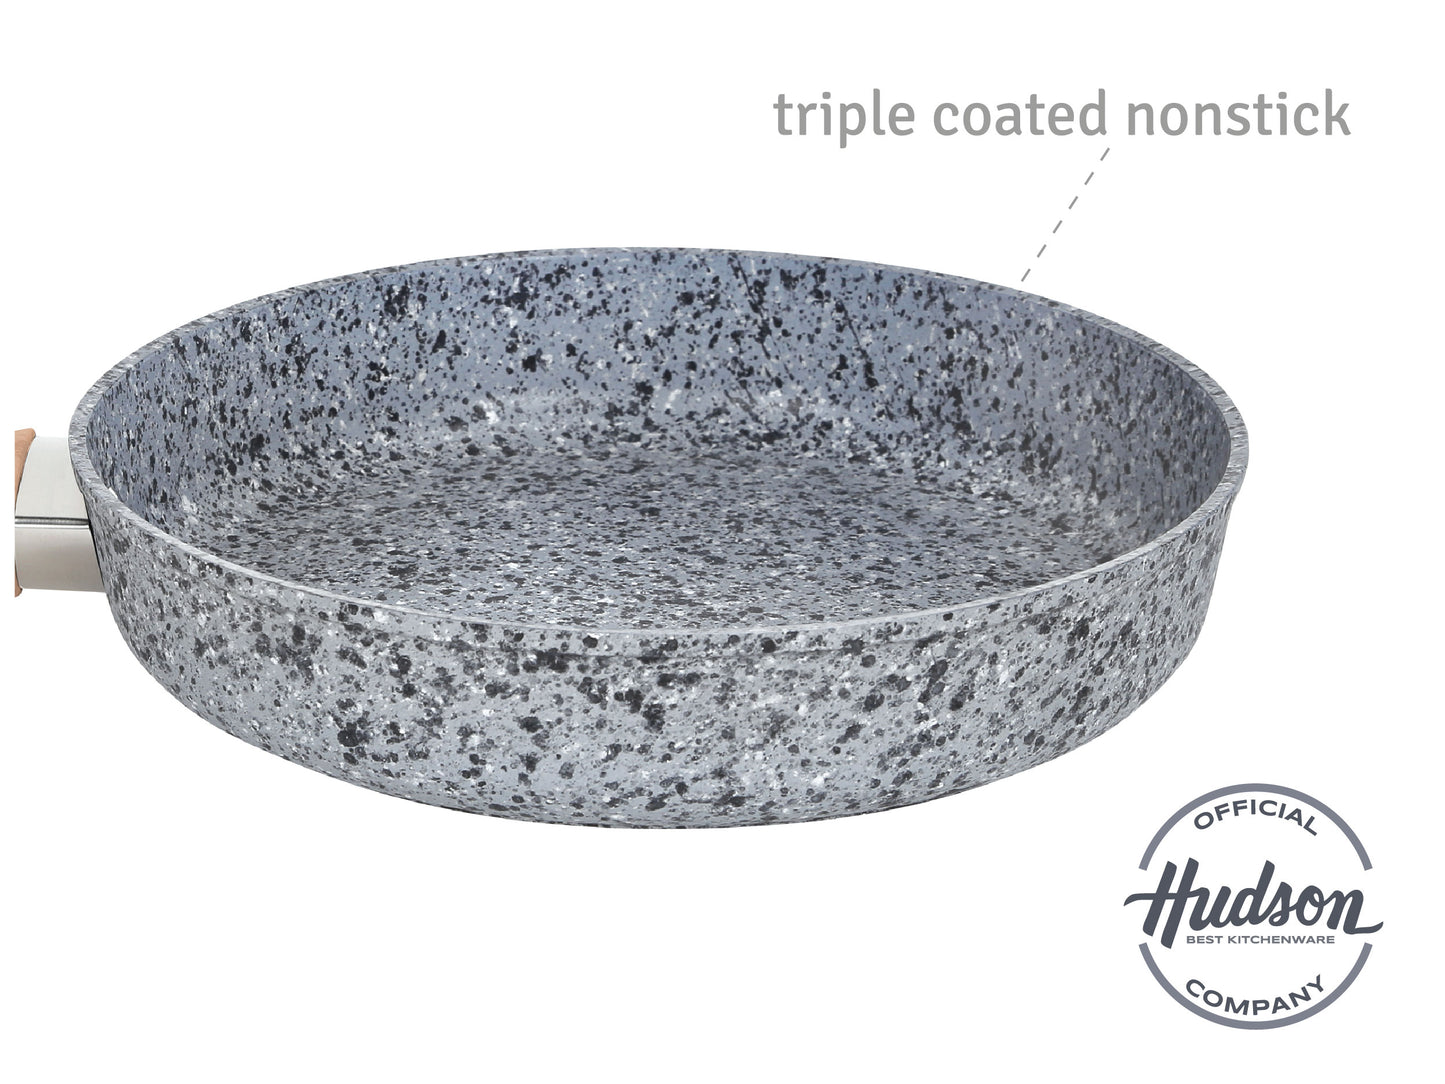 HUDSON Forged Nonstick Granite Frying Pan 2.6Qt Cookware, Pots and Pans, Dishwasher Safe